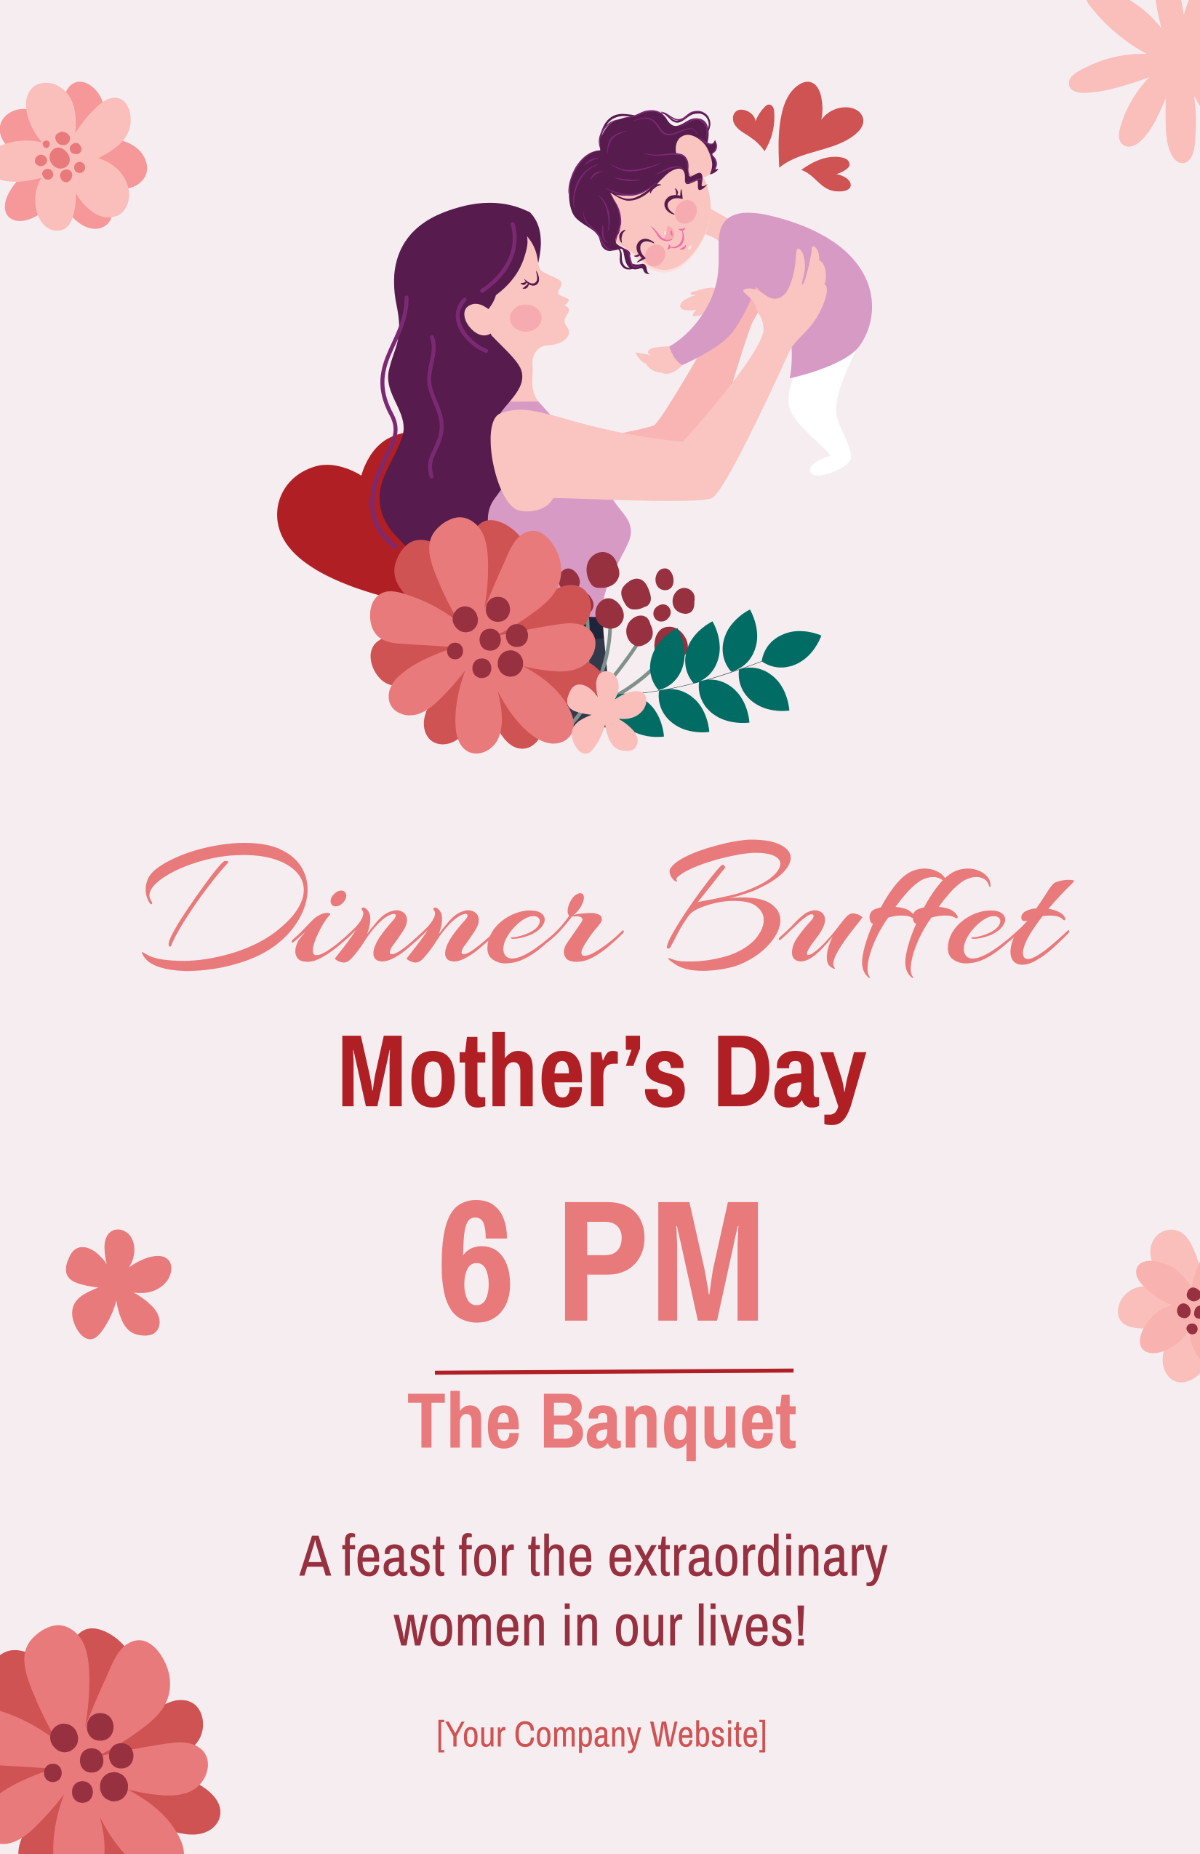 Free Mother's Day Poster Template